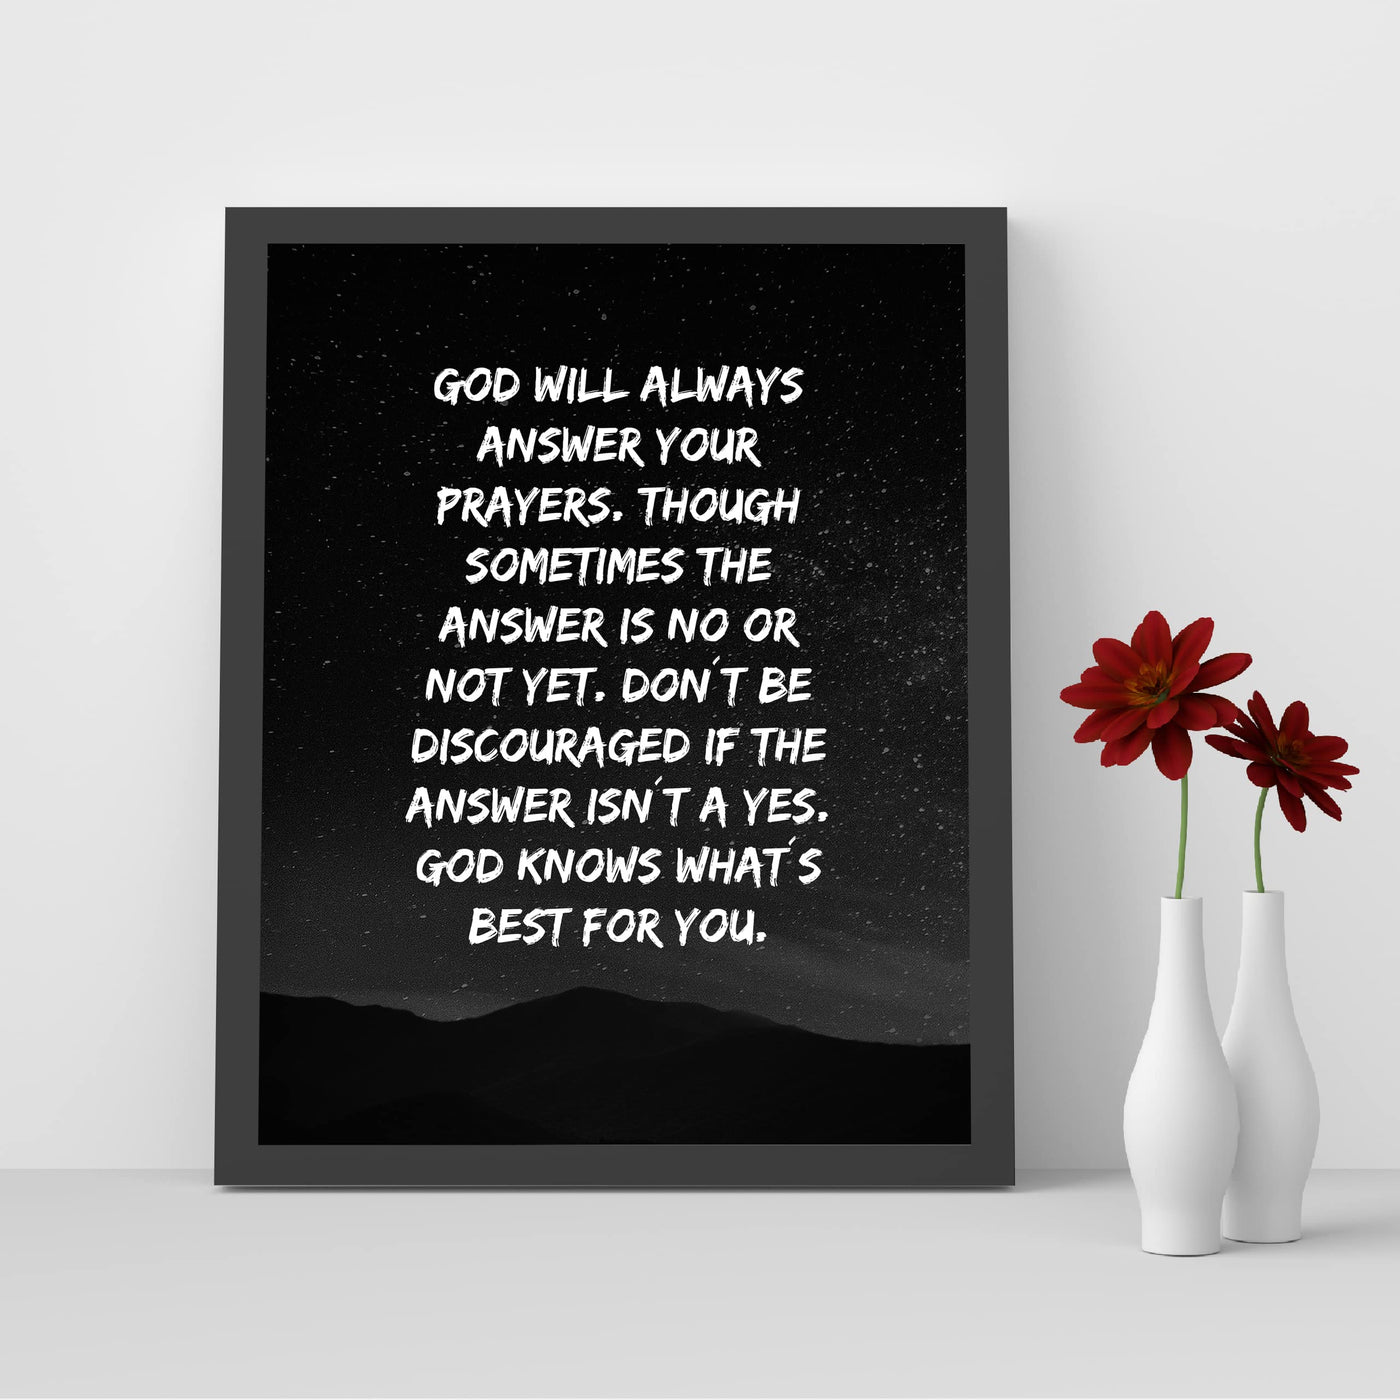 God Knows What's Best For You Inspirational Quotes Wall Art -8 x 10" Starry Night Picture Print -Ready to Frame. Perfect Decor for Home-Office-Christian-School. Great Religious Gift of Faith!